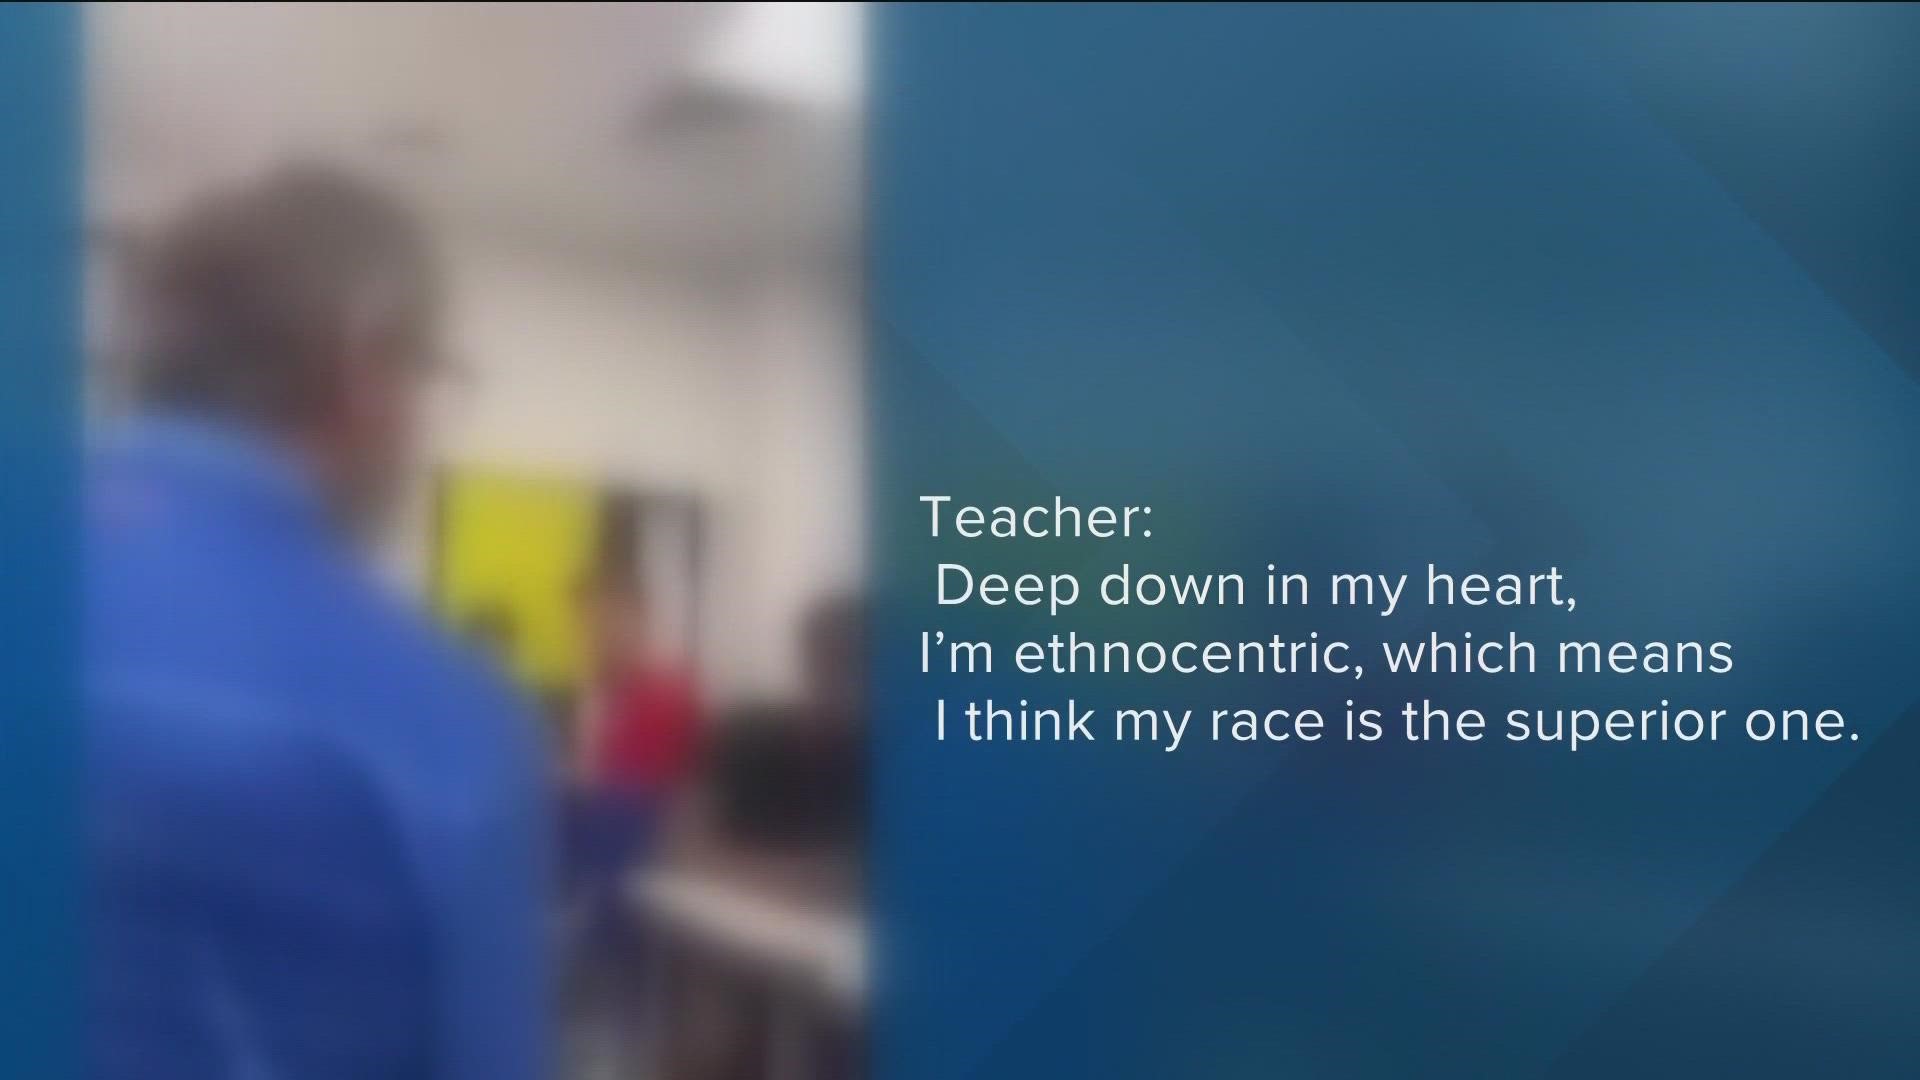 A middle school teacher who made inappropriate comments about race in a classroom is now out of a job.